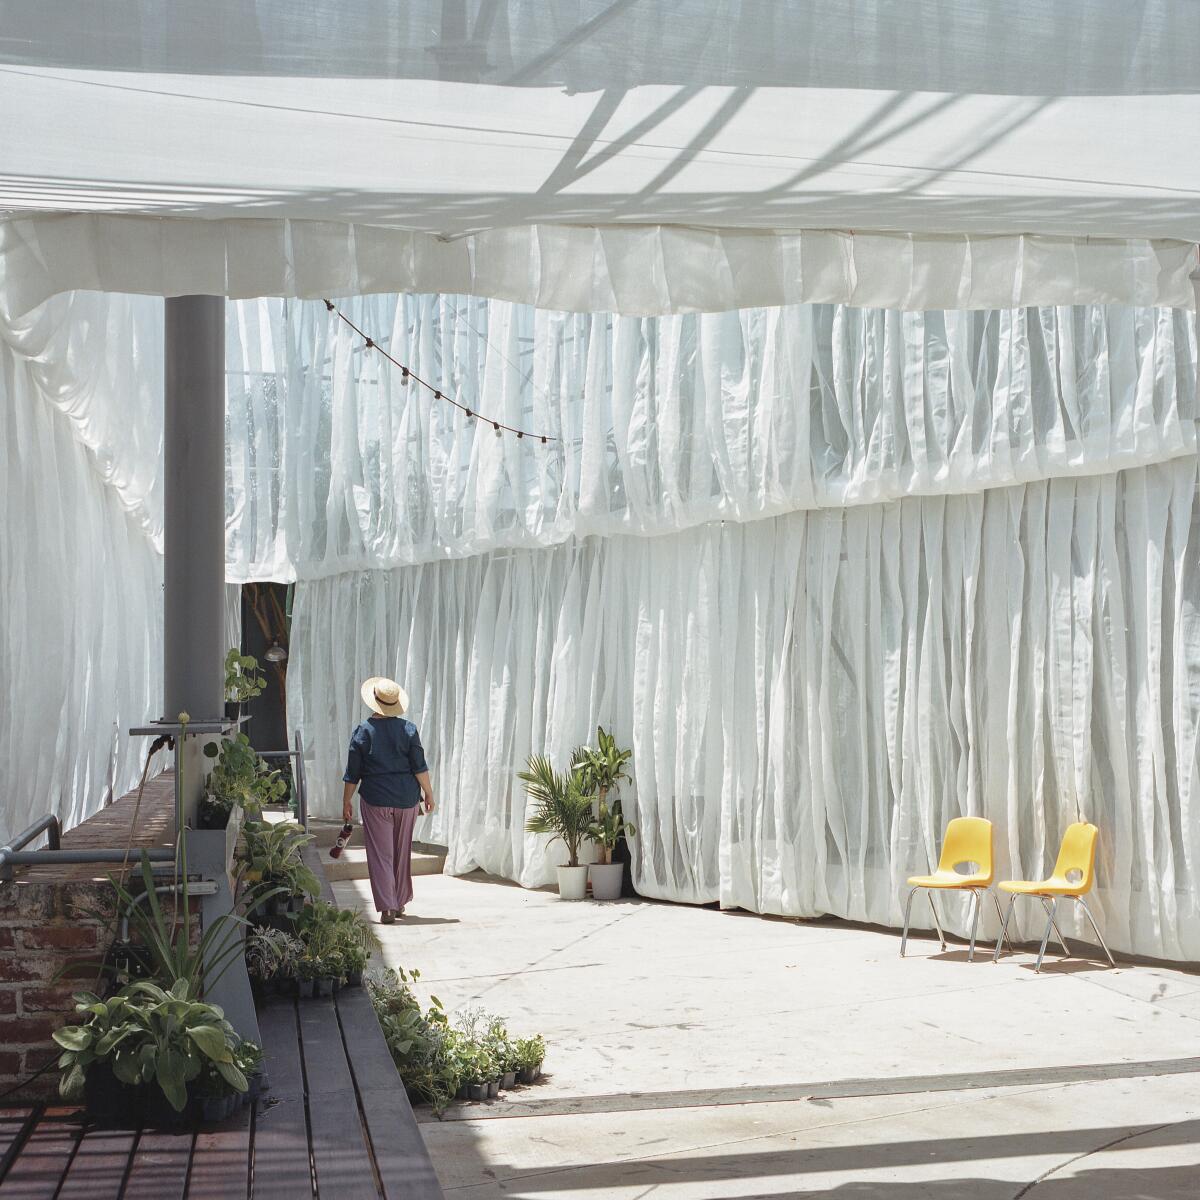 A person walks through a triangular courtyard whose multiple levels are wrapped in white fabric